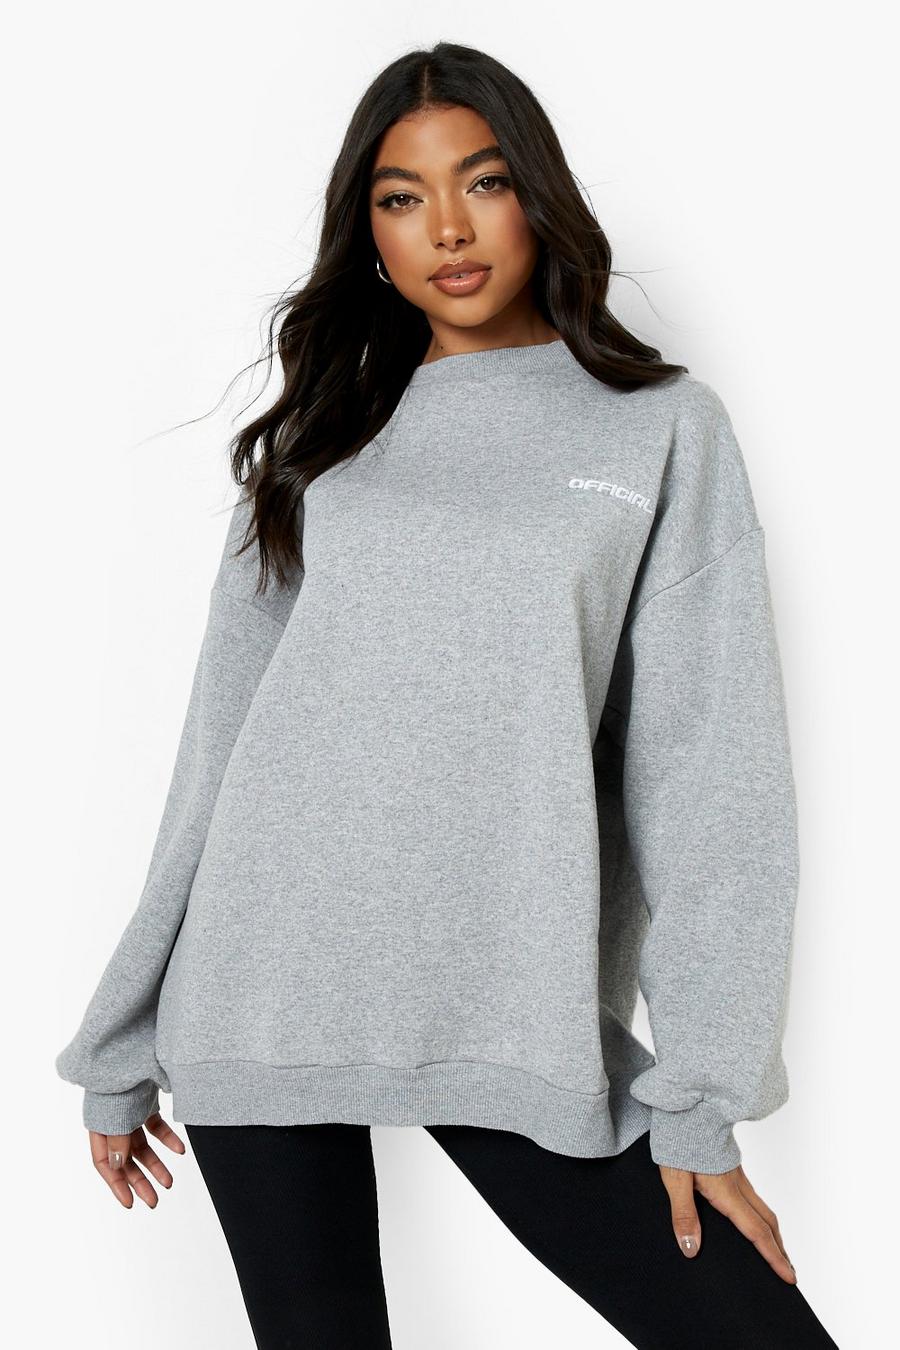 Grey Tall - Ofcl Sweatshirt image number 1